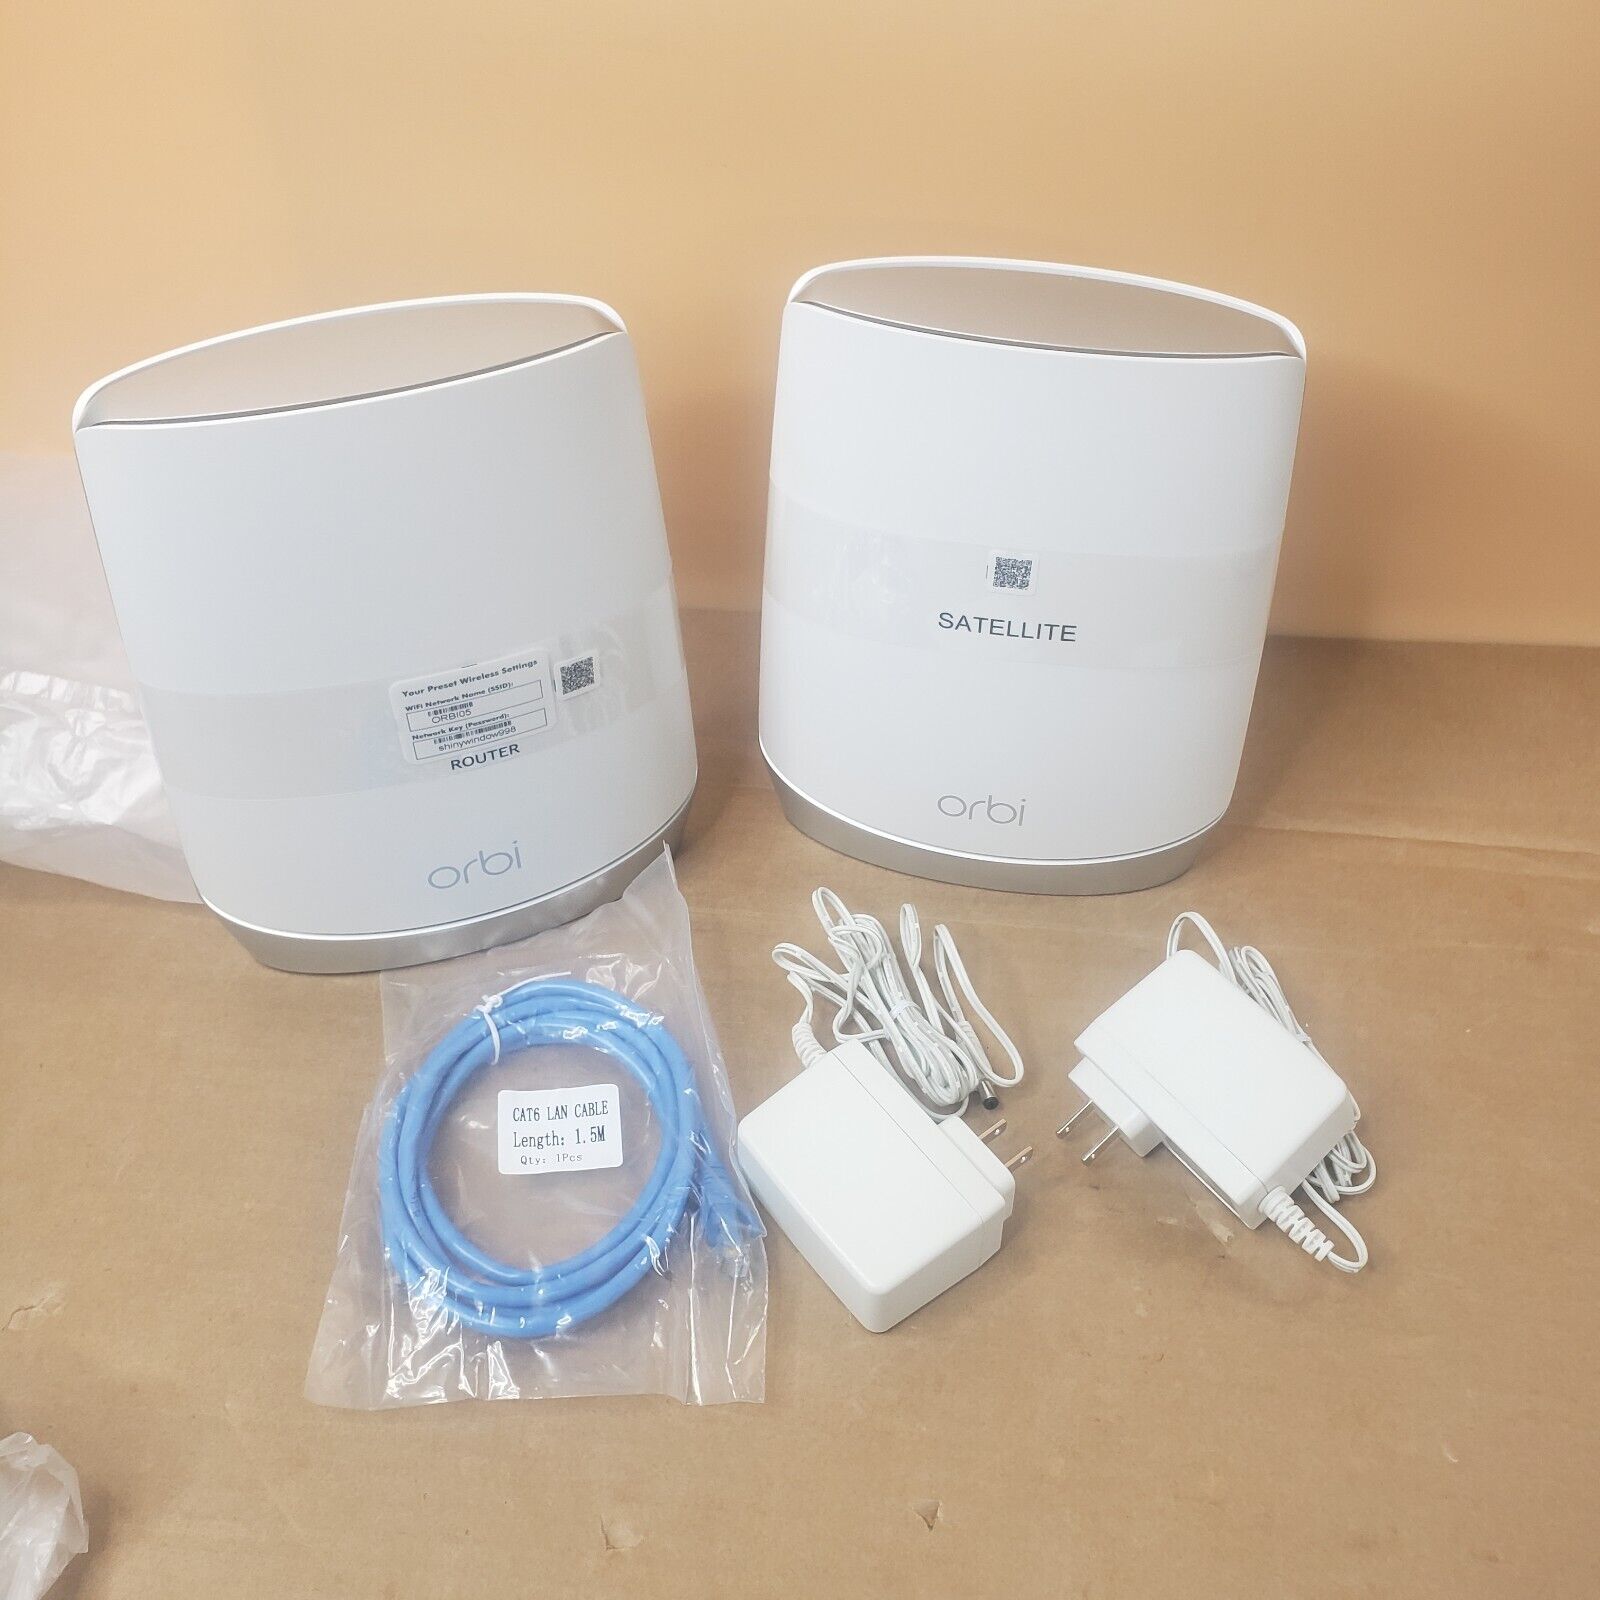 Netgear RBR750 Orbi WiFi 6 Router And RBS750 Satellite A+ Condition 